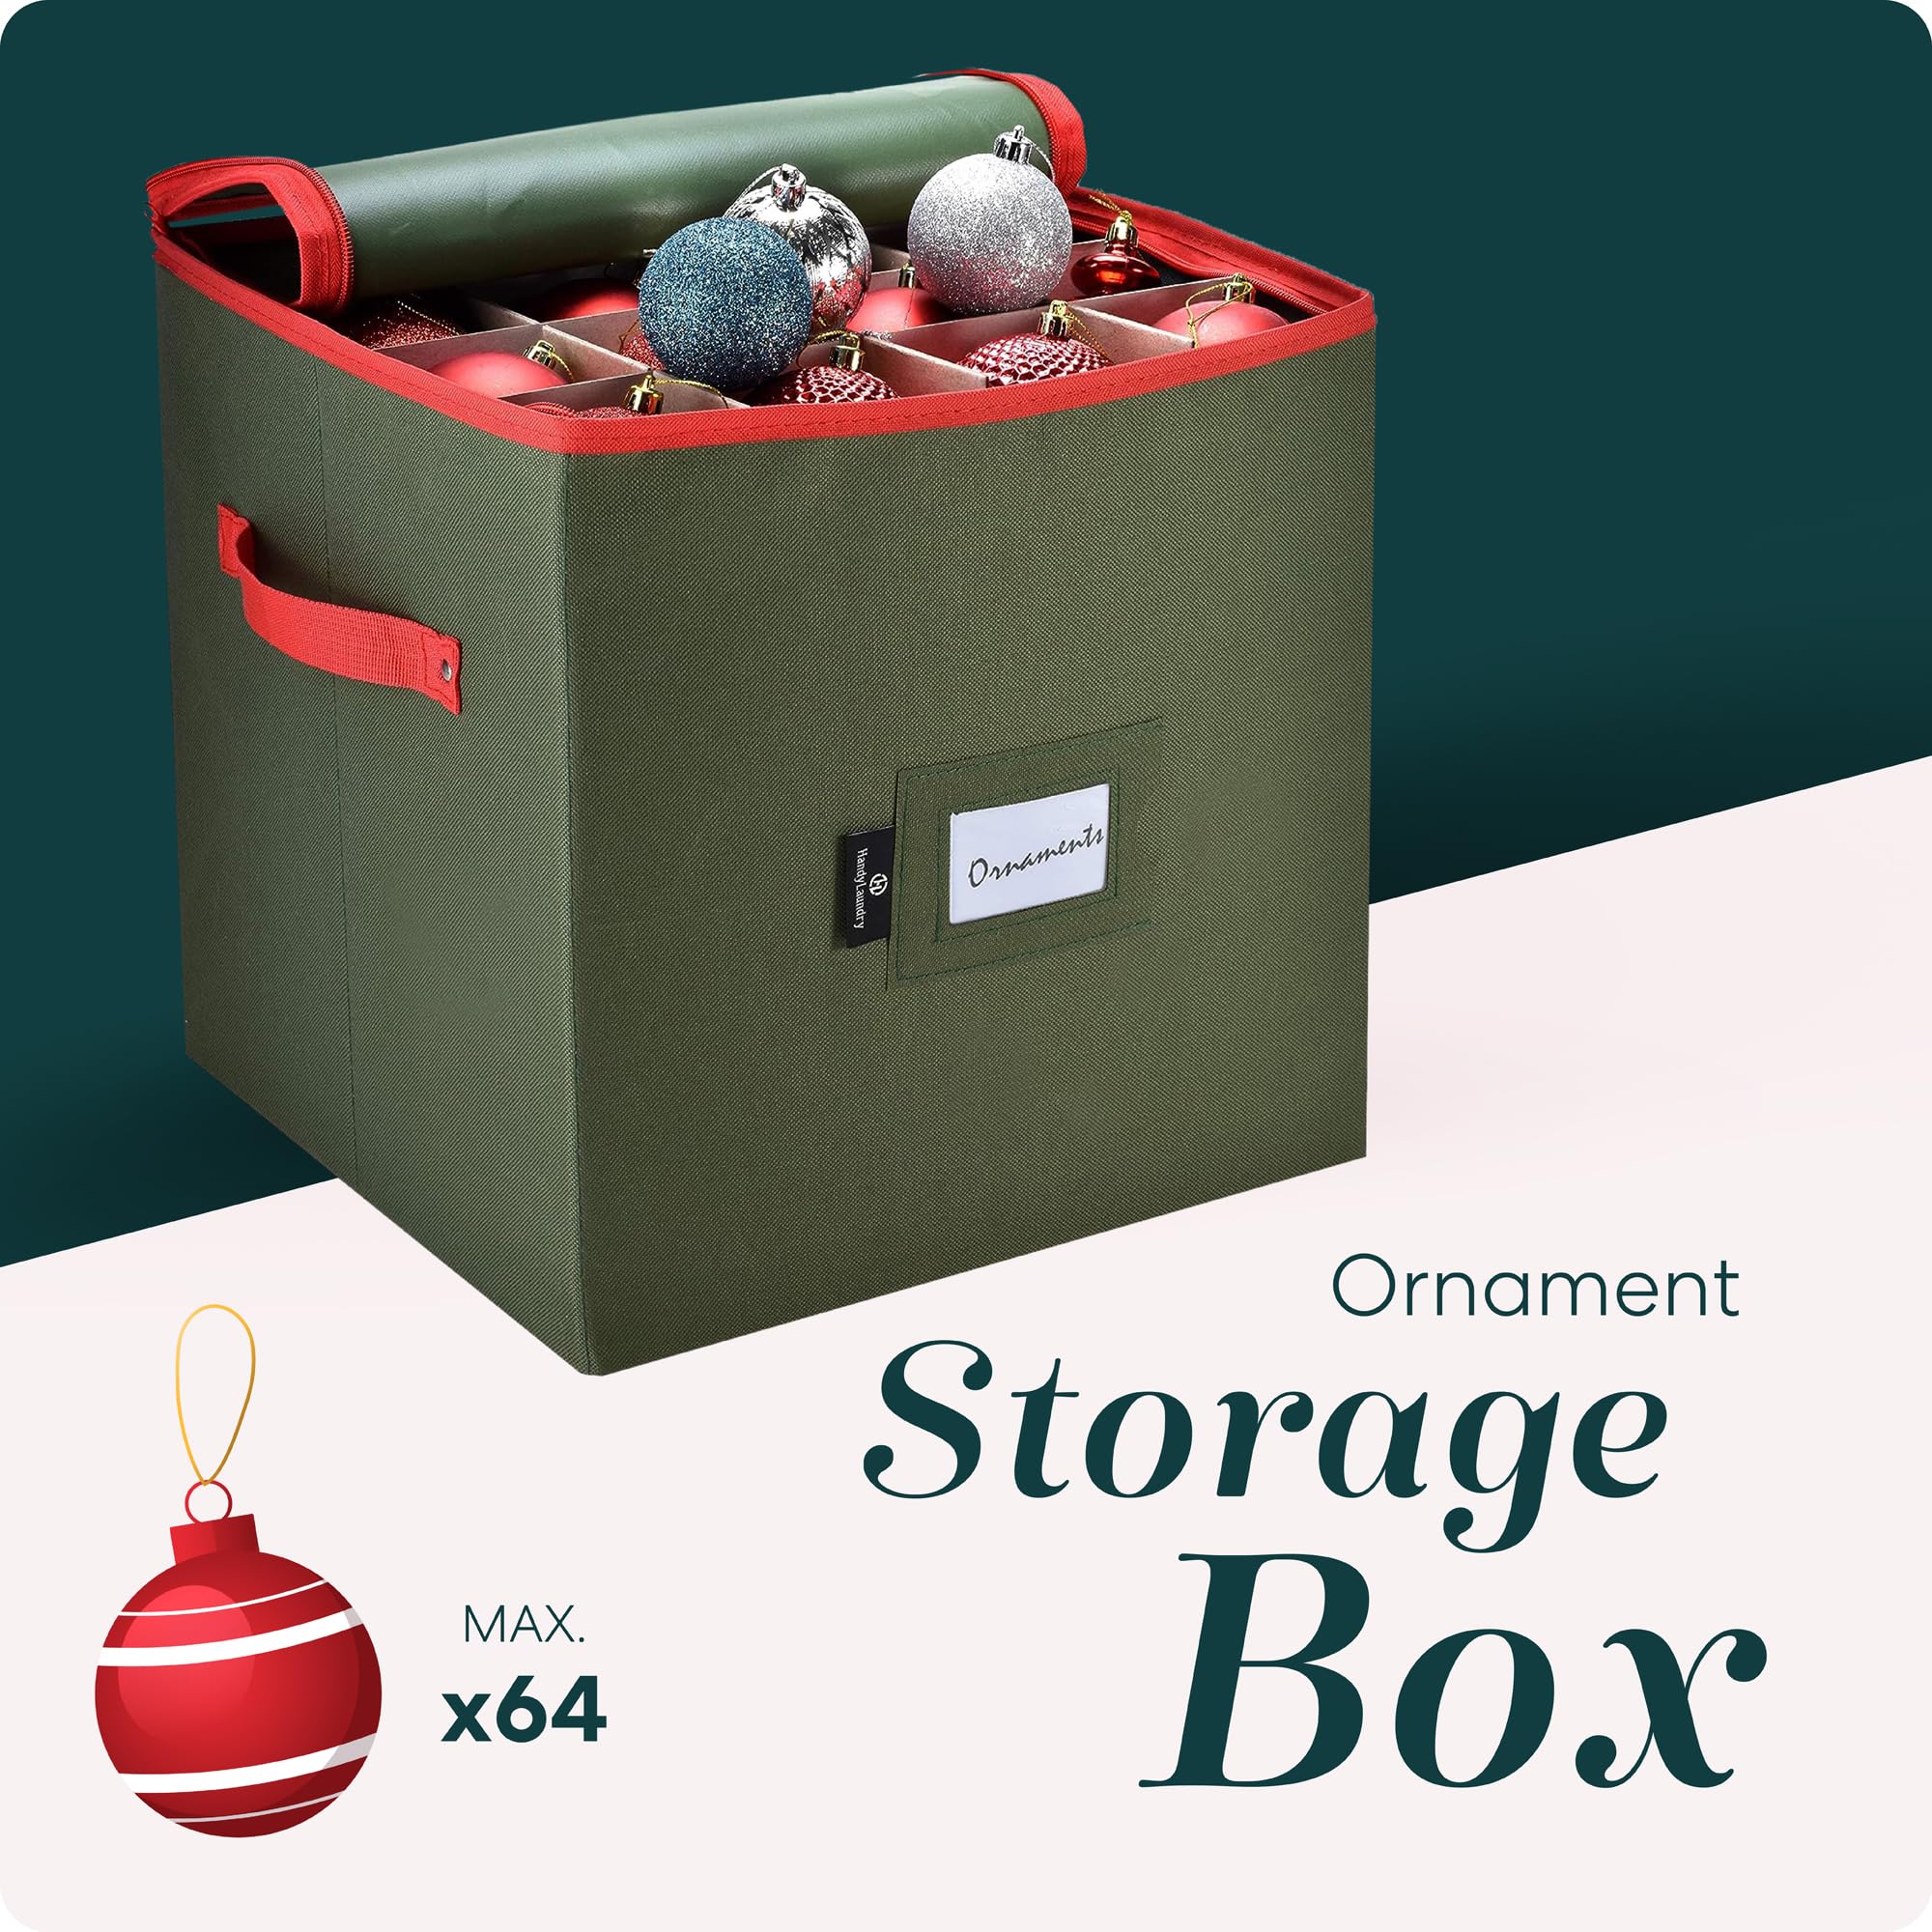 Christmas Ornament Storage - Stores up to 64 Holiday Ornaments, Adjustable Dividers, Covered Top, Two Handles. Attractive Storage Box Keeps Holiday Decorations Clean and Dry for Next Season.  - Like New